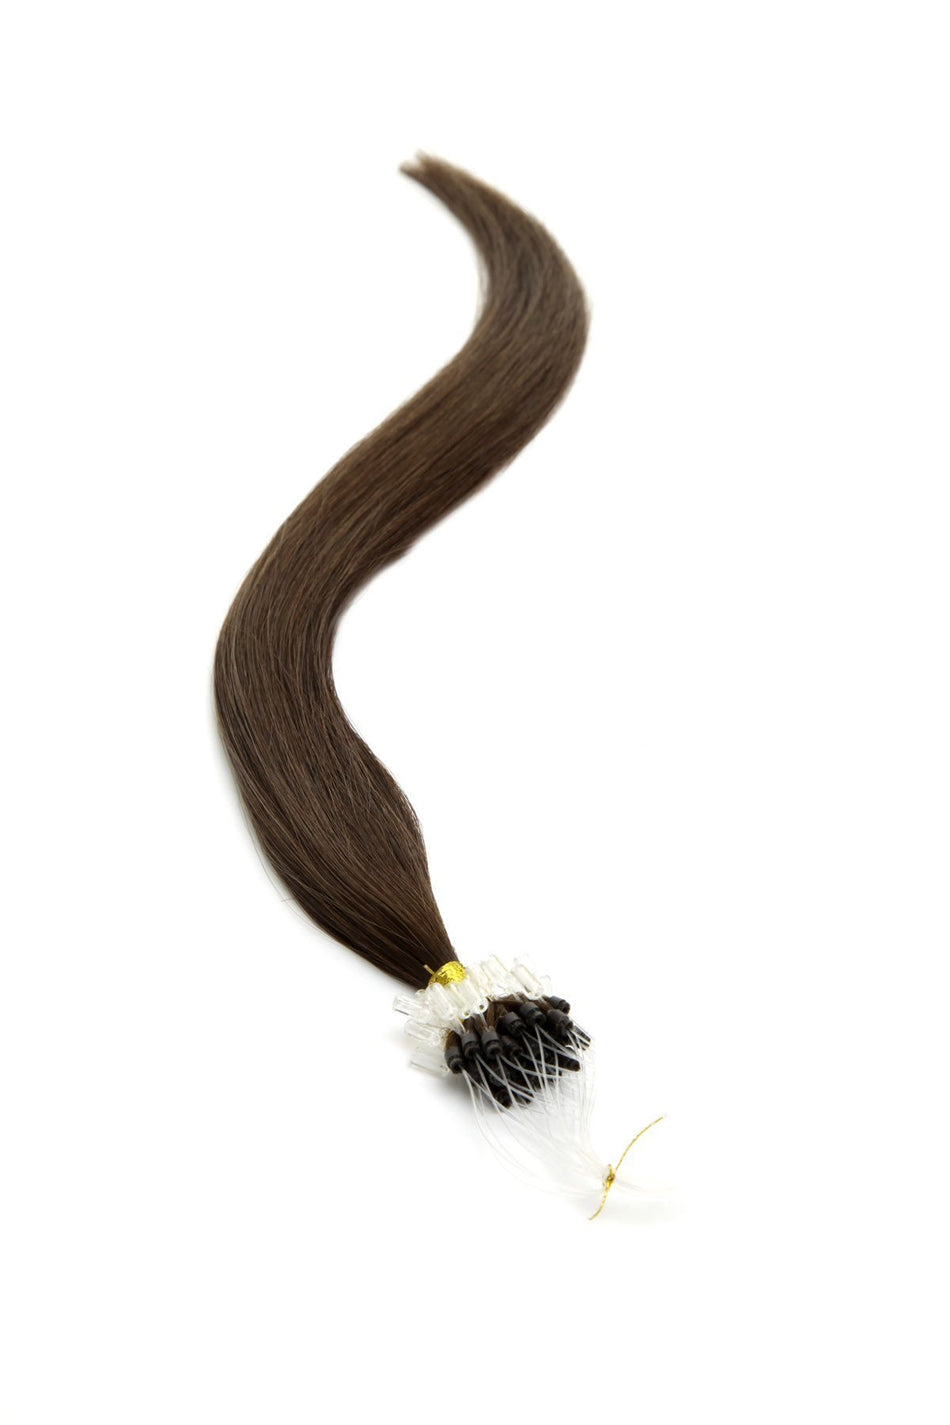 Micro Ring Hair Extensions | 22 inch Dark Brown (3) - beautyhair.co.ukHair Extensions